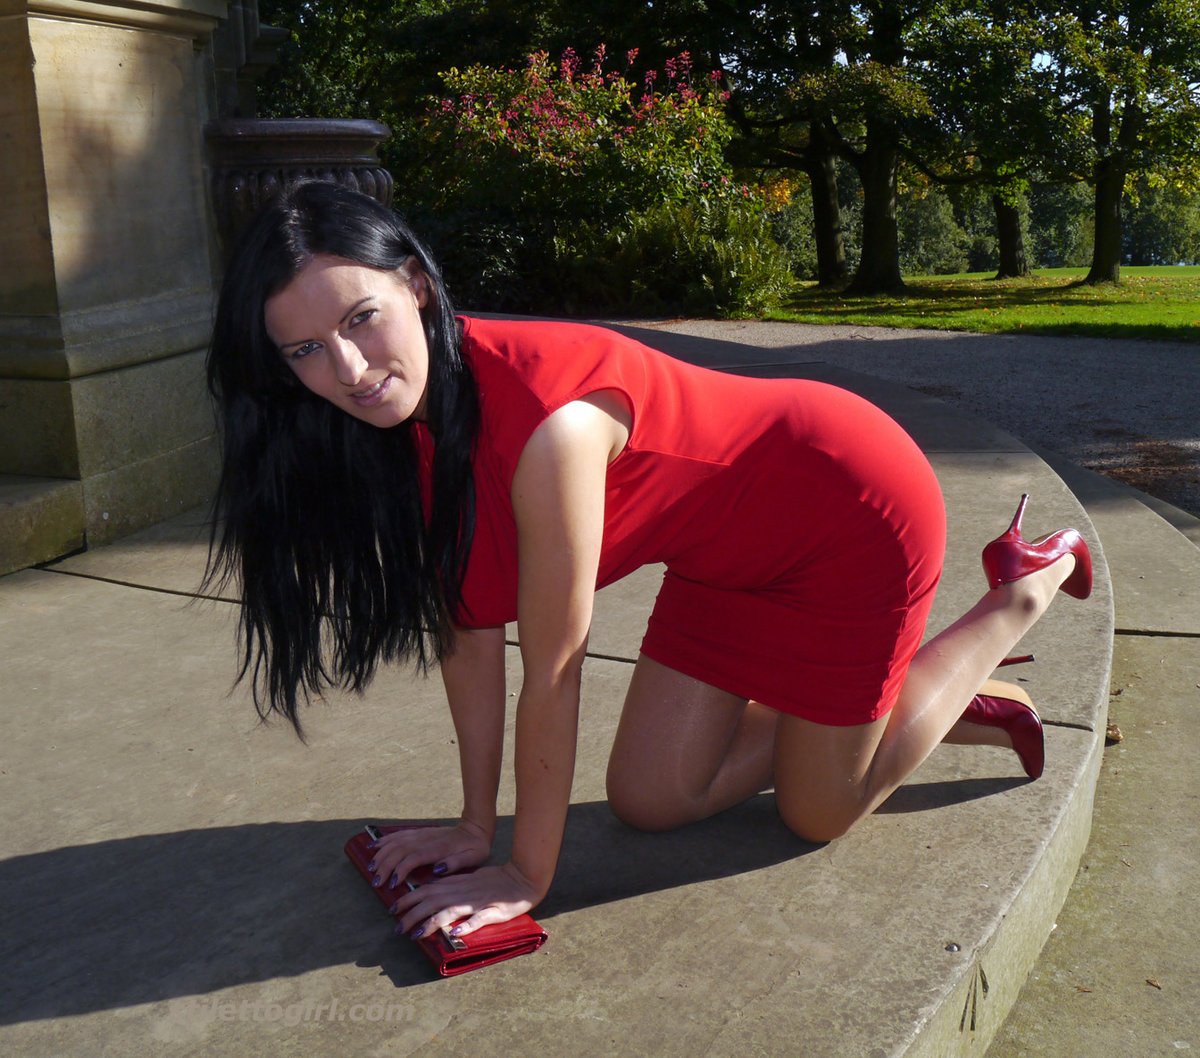 [StilettoGirl] Tricia set 1014 nice red shoes